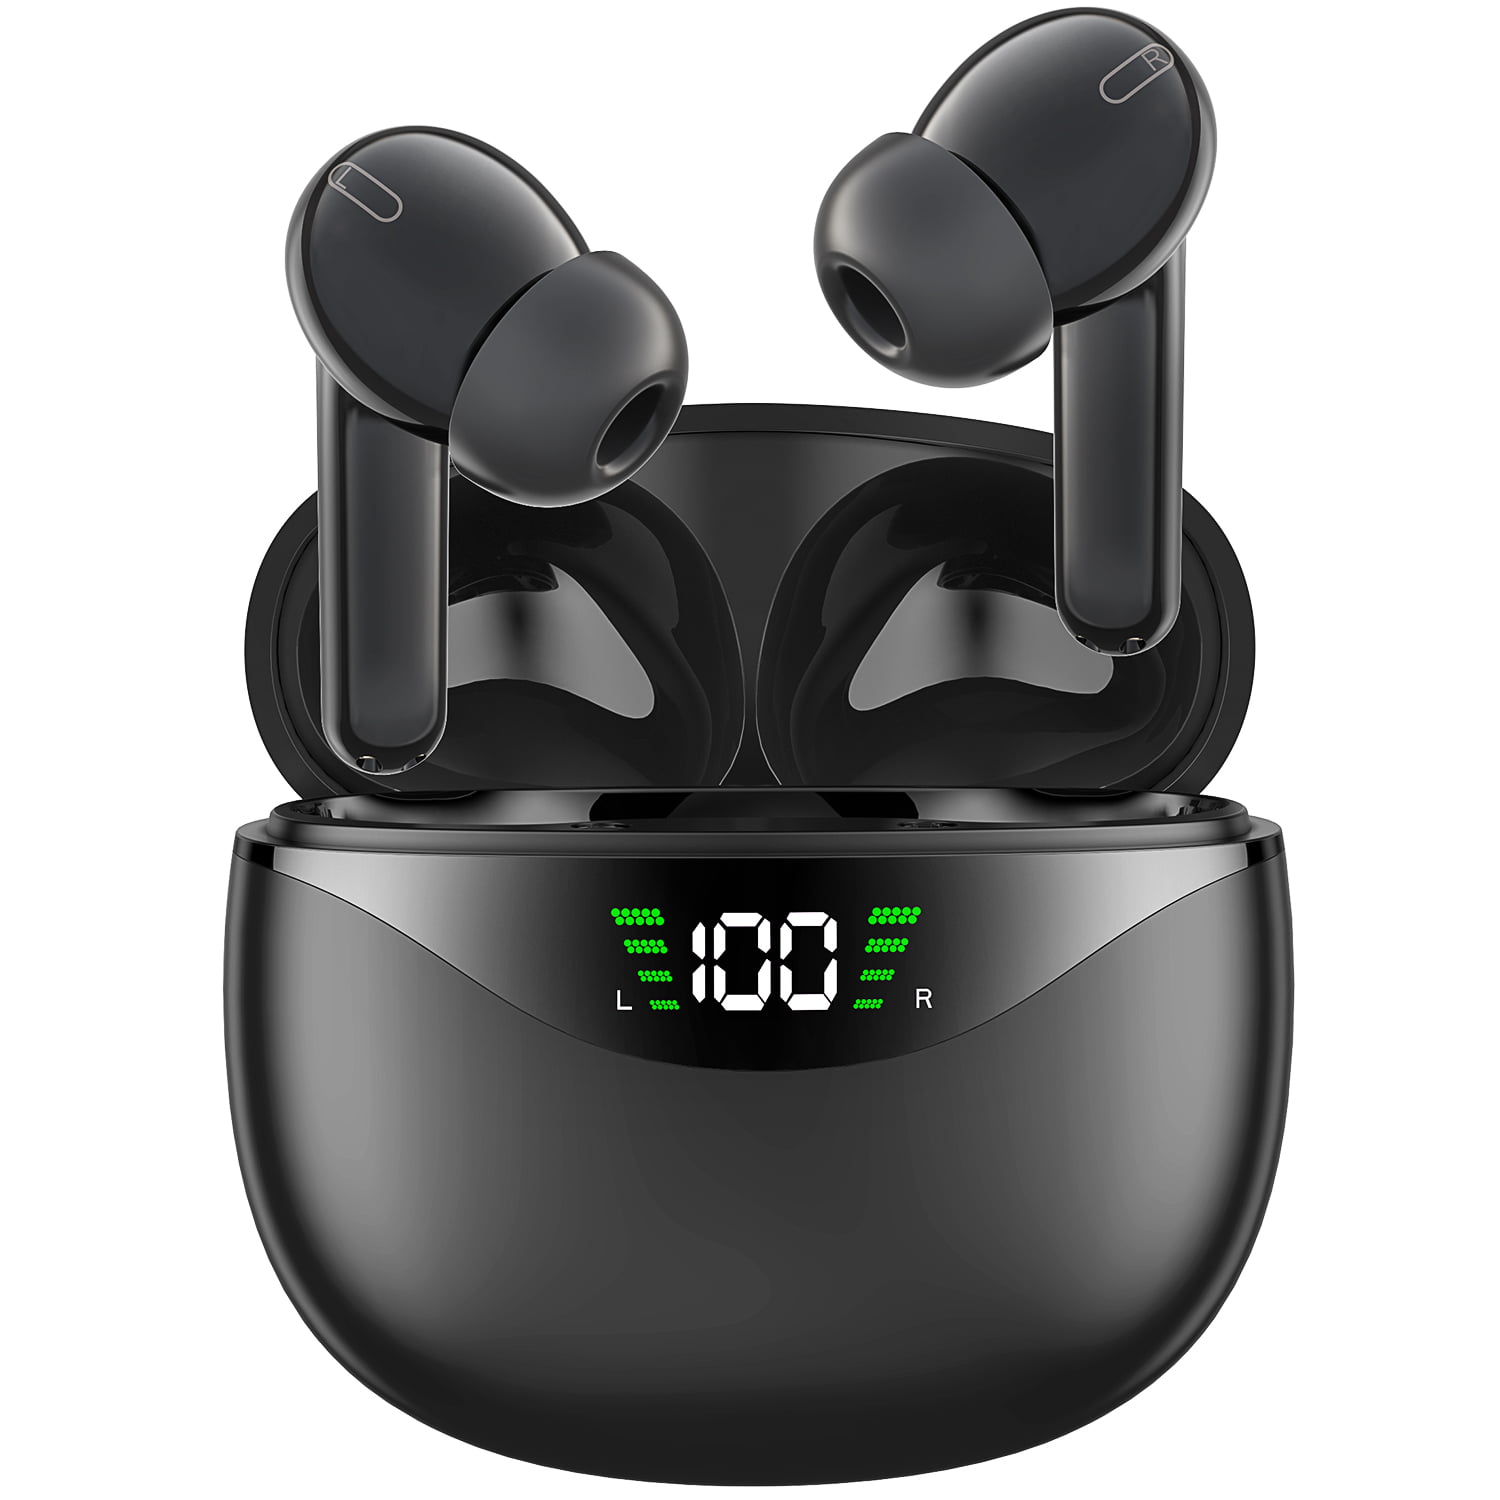 Wireless Earbuds with Deep Bass and HiFi Sound